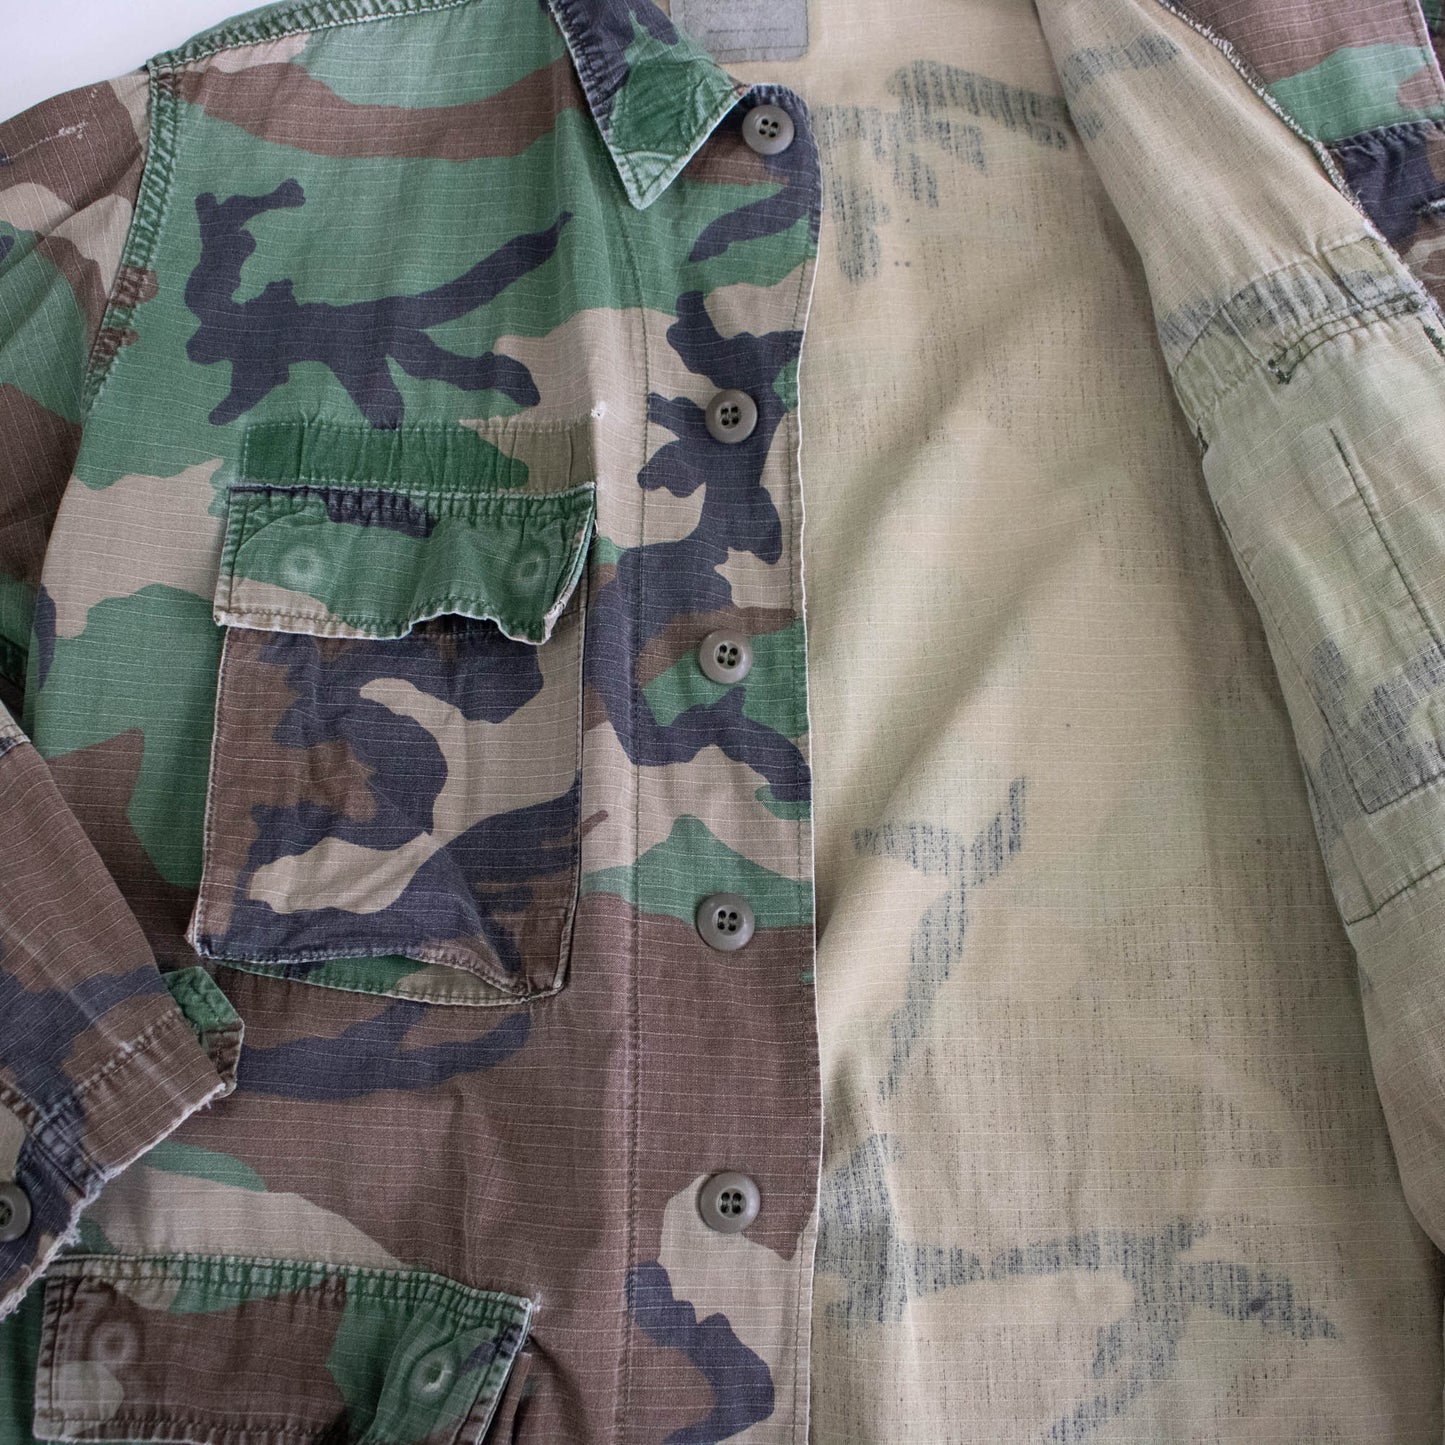 80's Camouflage Cotton Military Jacket